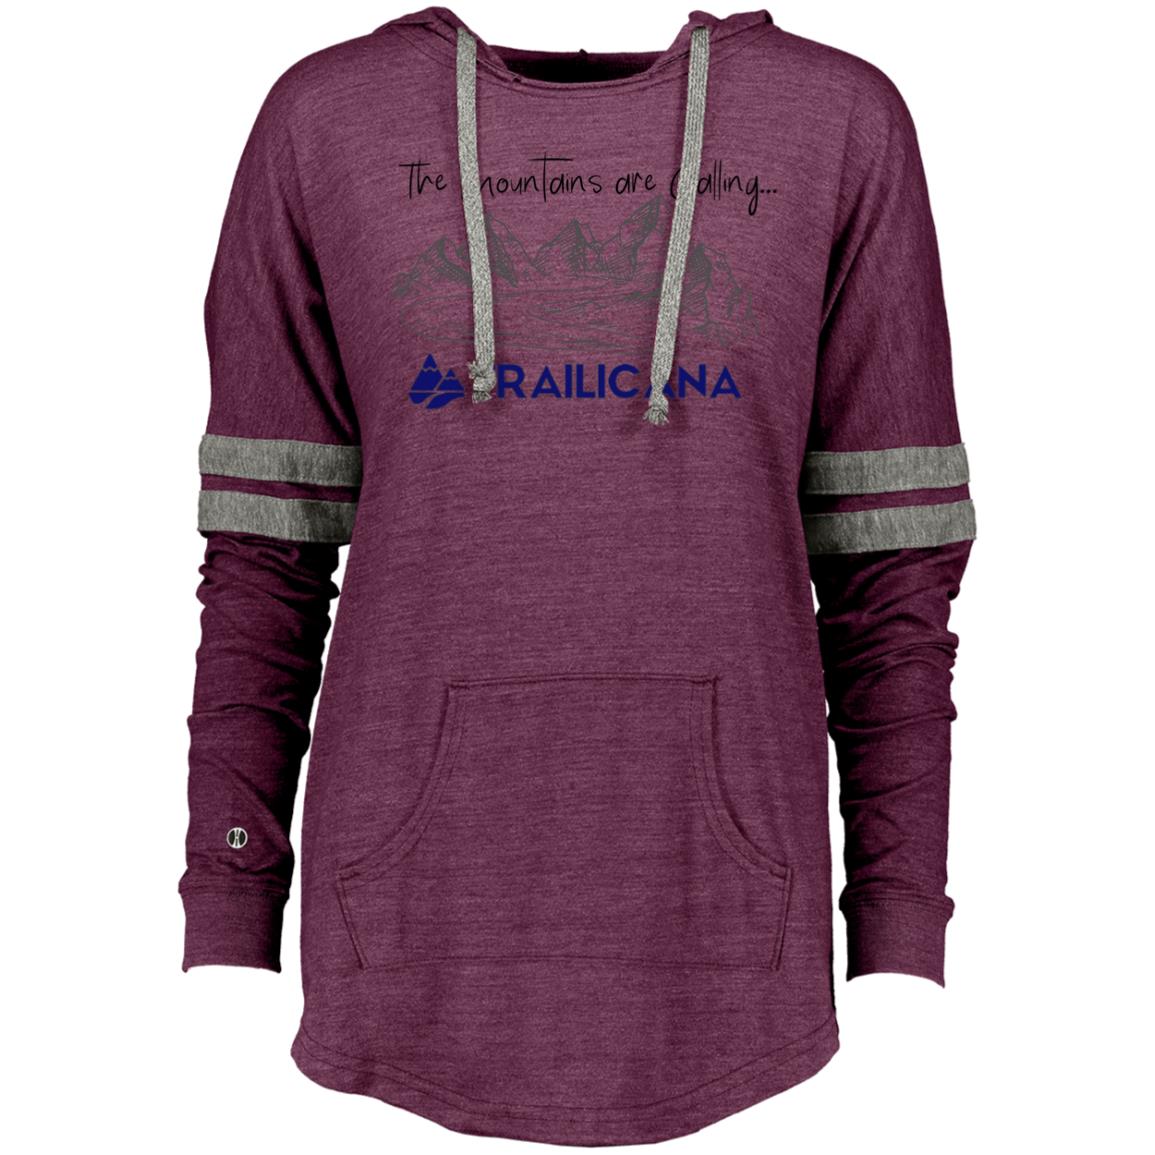 Ladies "Mountains are calling" Hoodie Pull Over